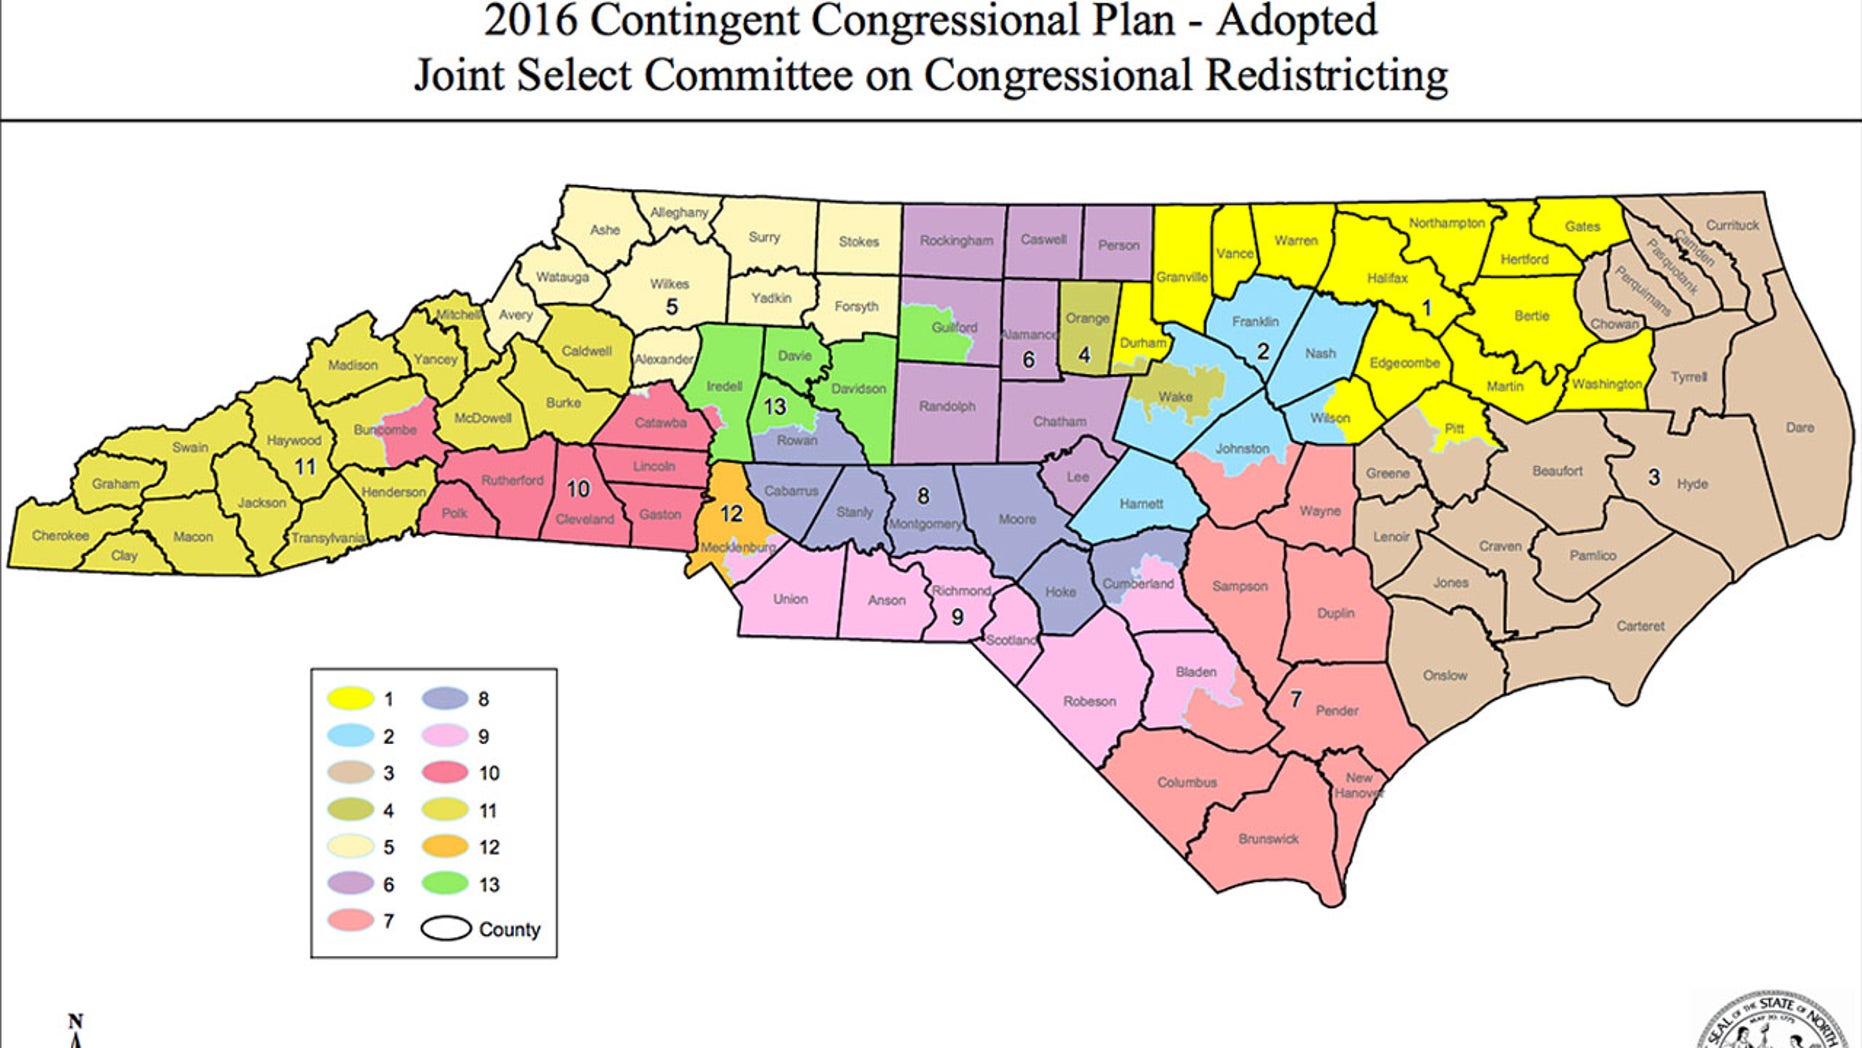 Federal court again orders North Carolina congressional districts